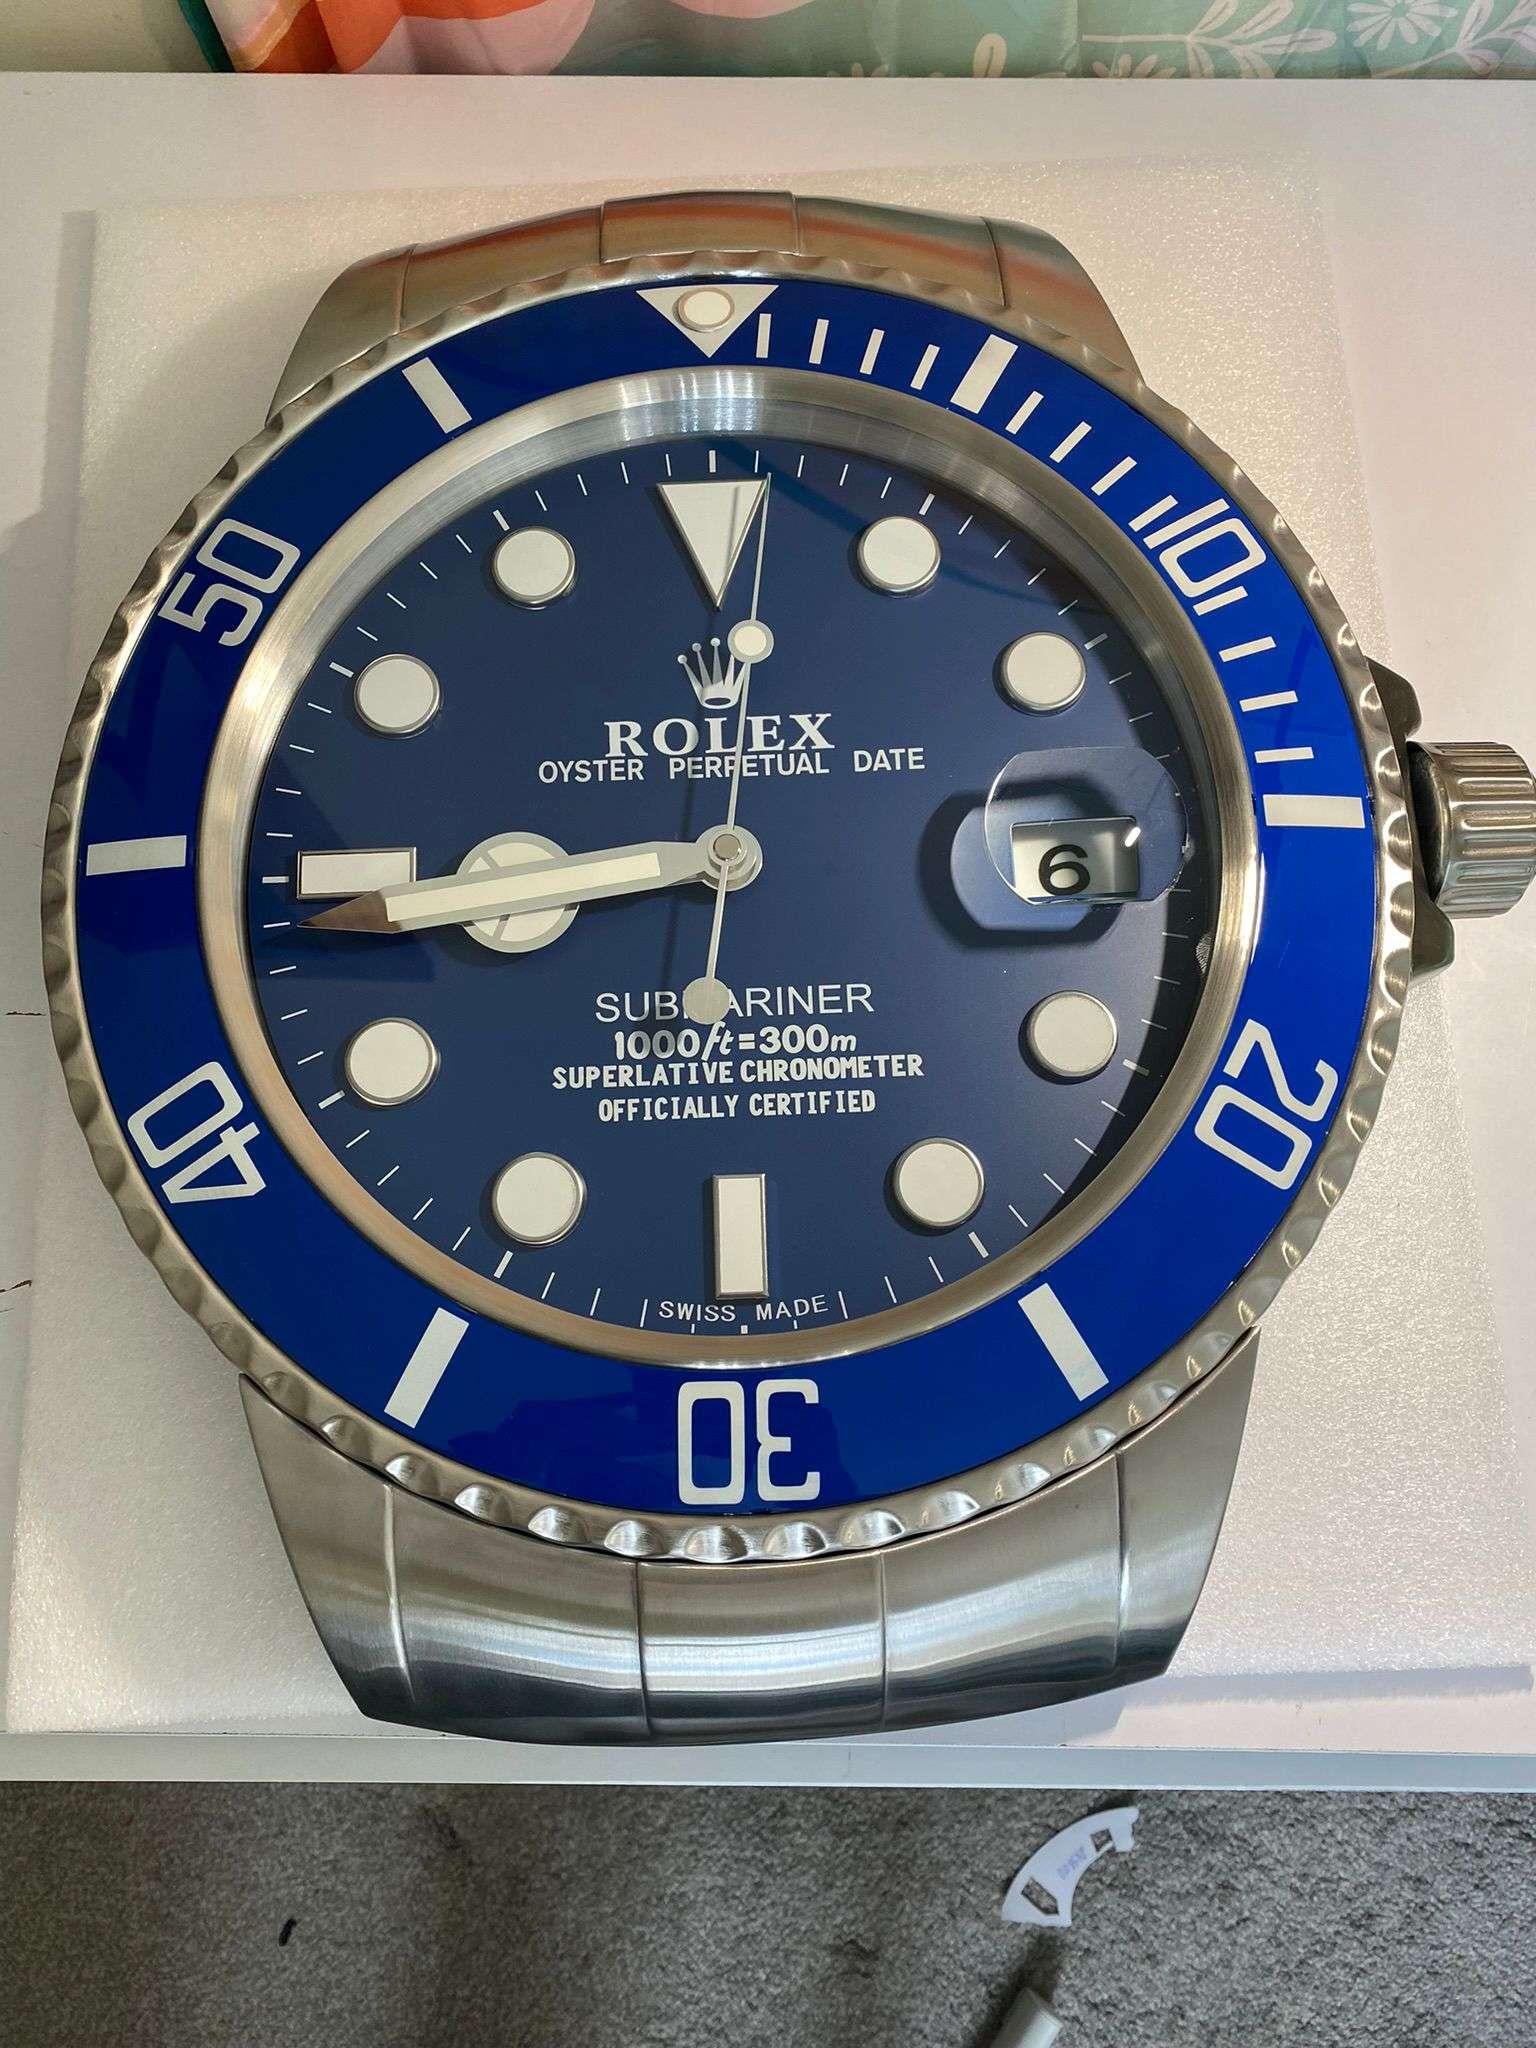 ROLEX Officially Certified Oyster Perpetual Date Blue Submariner Wall Clock 
Good condition, working.
Free international shipping.